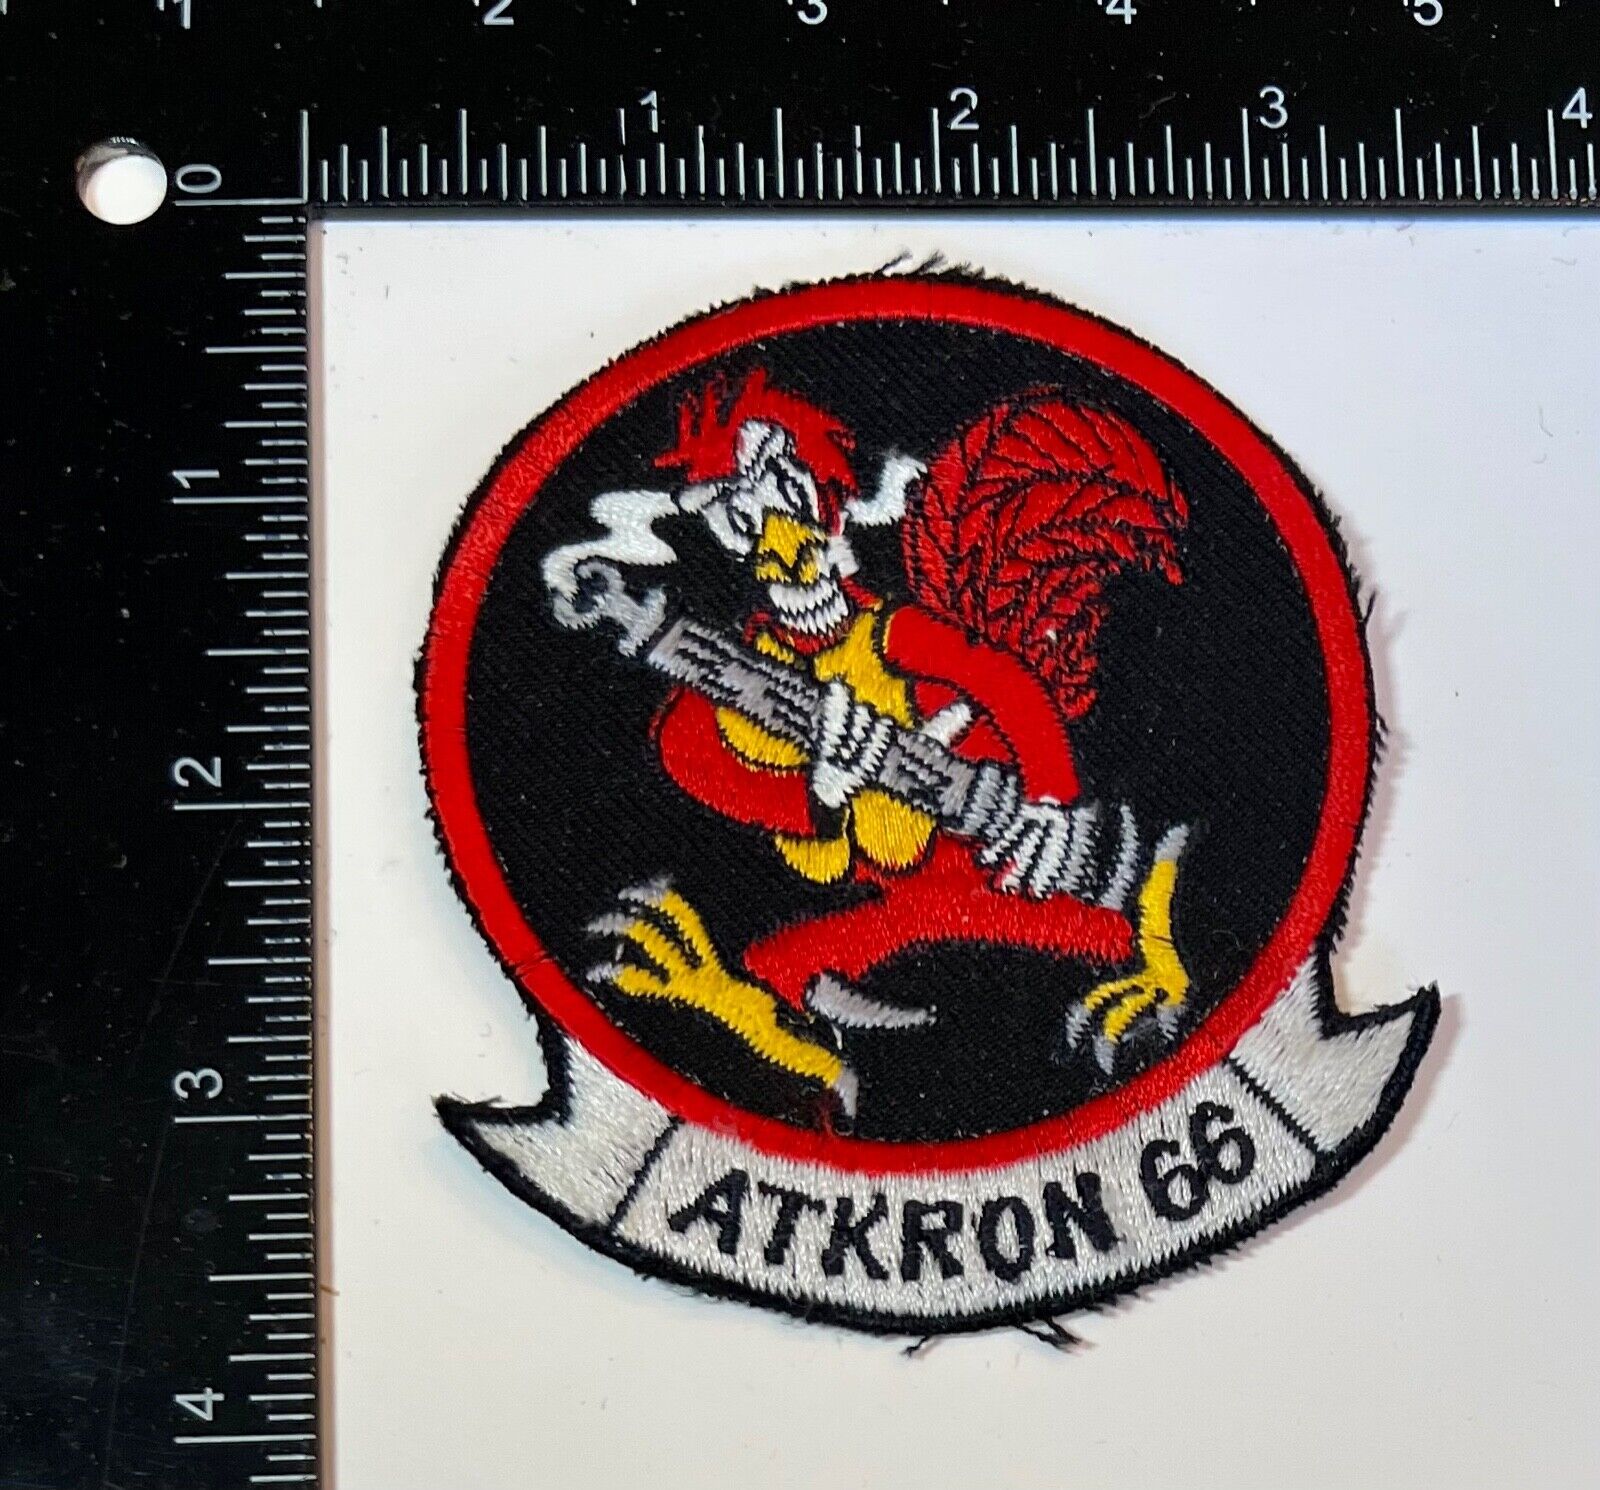 Cold War USN US Navy VFA-66 ATKRON Attack Squadron Patch